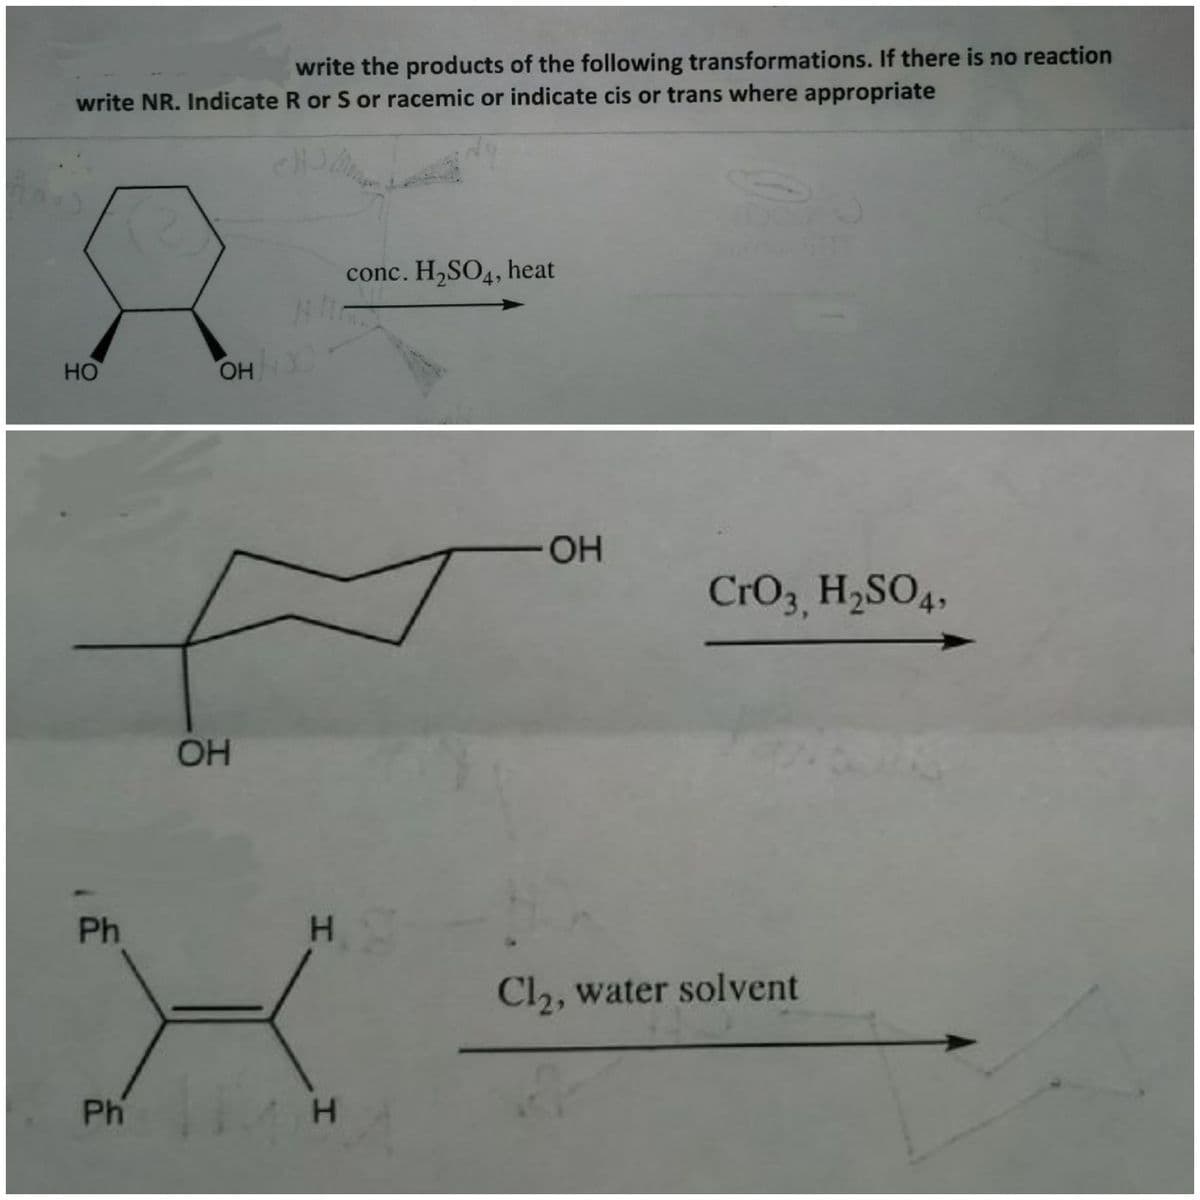 write the products of the following transformations. If there is no reaction
write NR. Indicate R or S or racemic or indicate cis or trans where appropriate
conc. H,SO4, heat
HO
-HO-
CrO3 H,SO4,
OH
Ph
Cl2, water solvent
Ph H
